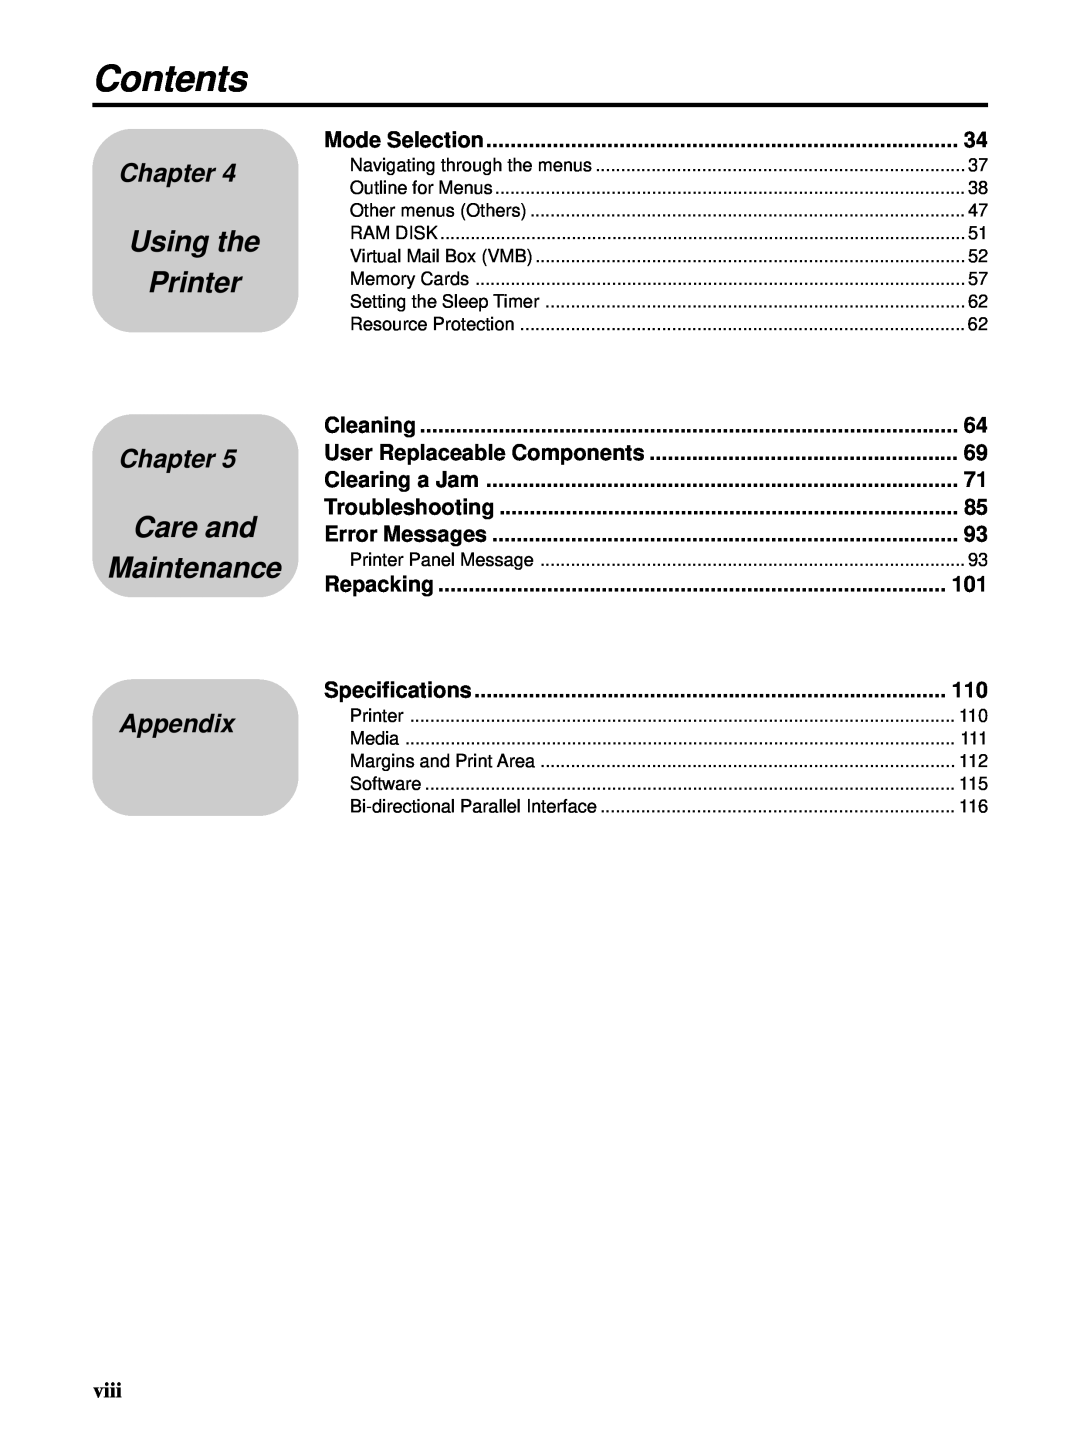 HP Ci 1100 manual Contents, Using the Printer, Care and Maintenance, Appendix, viii, Chapter 